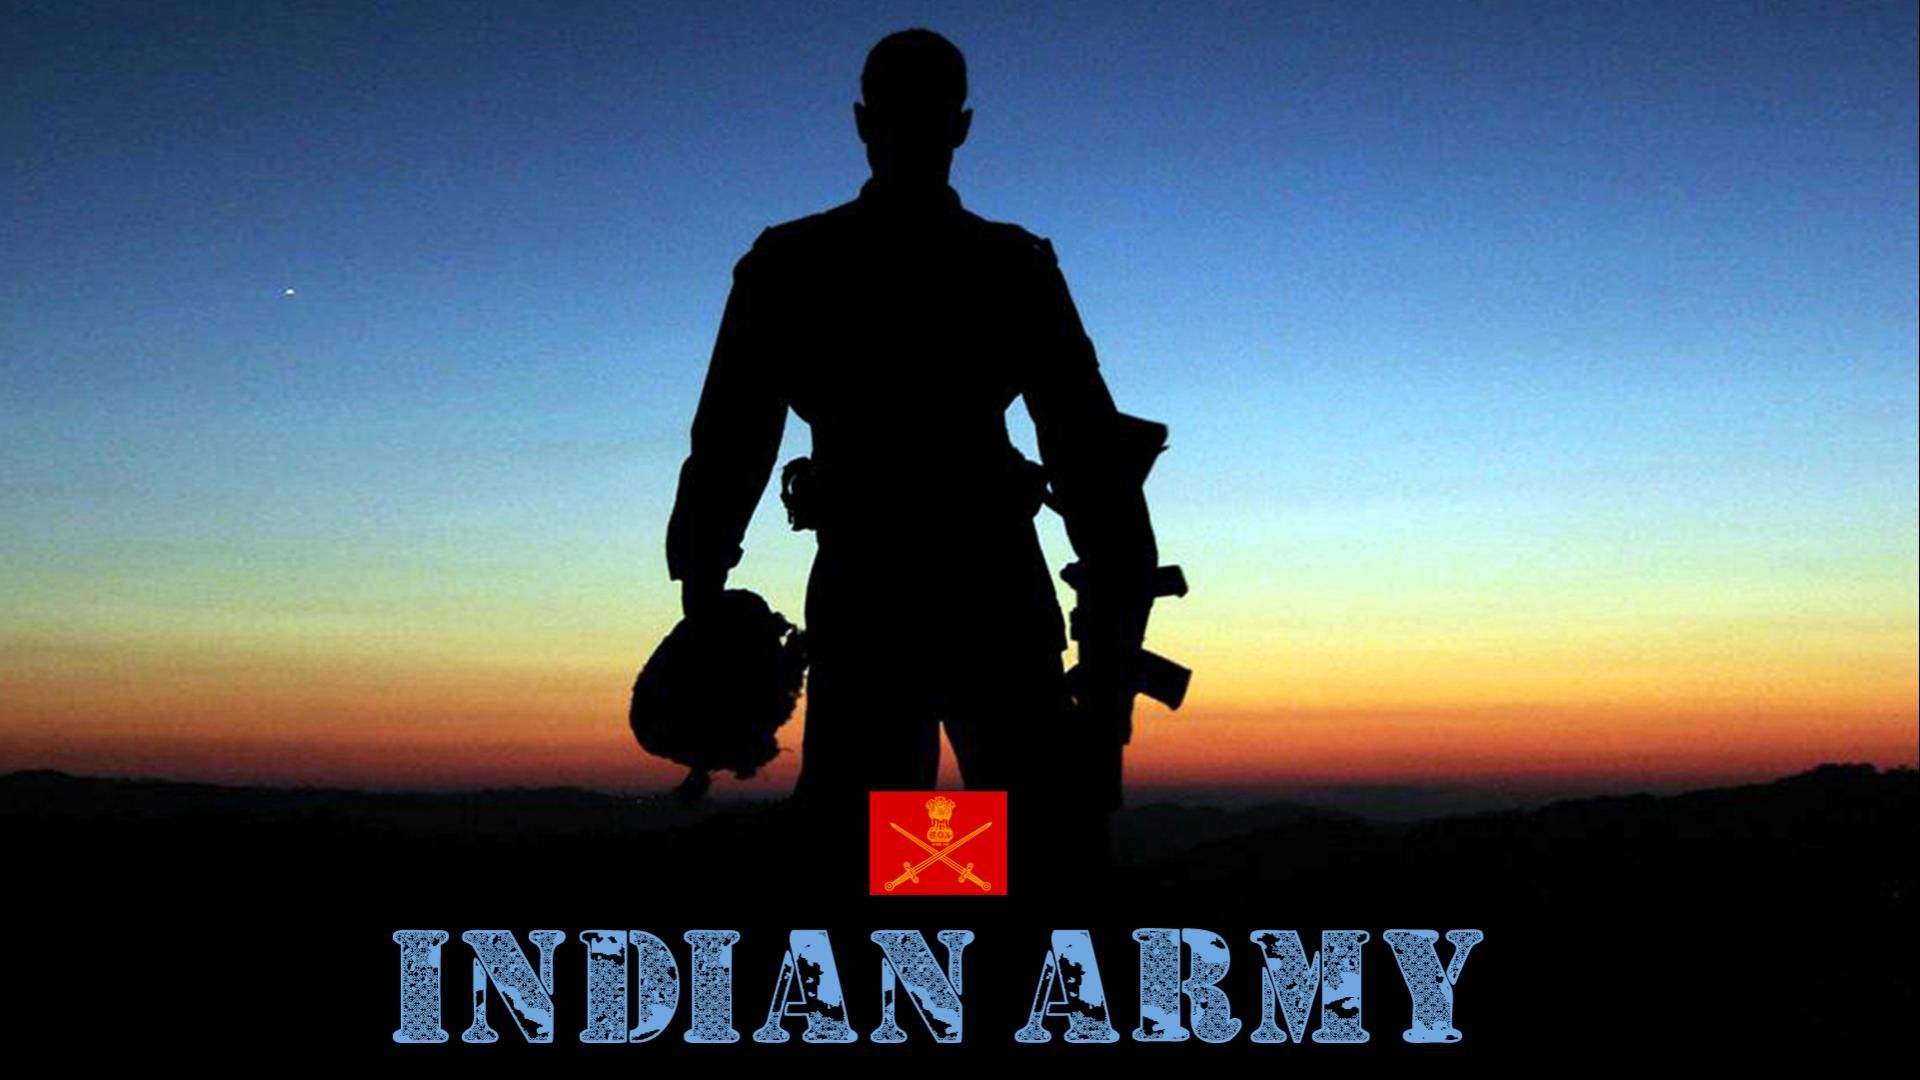 Indian Army HD Wallpaper 1080p Download with Picture of Soldier in Silhouette Wallpaper. Wallpaper Download. High Resolution Wallpaper